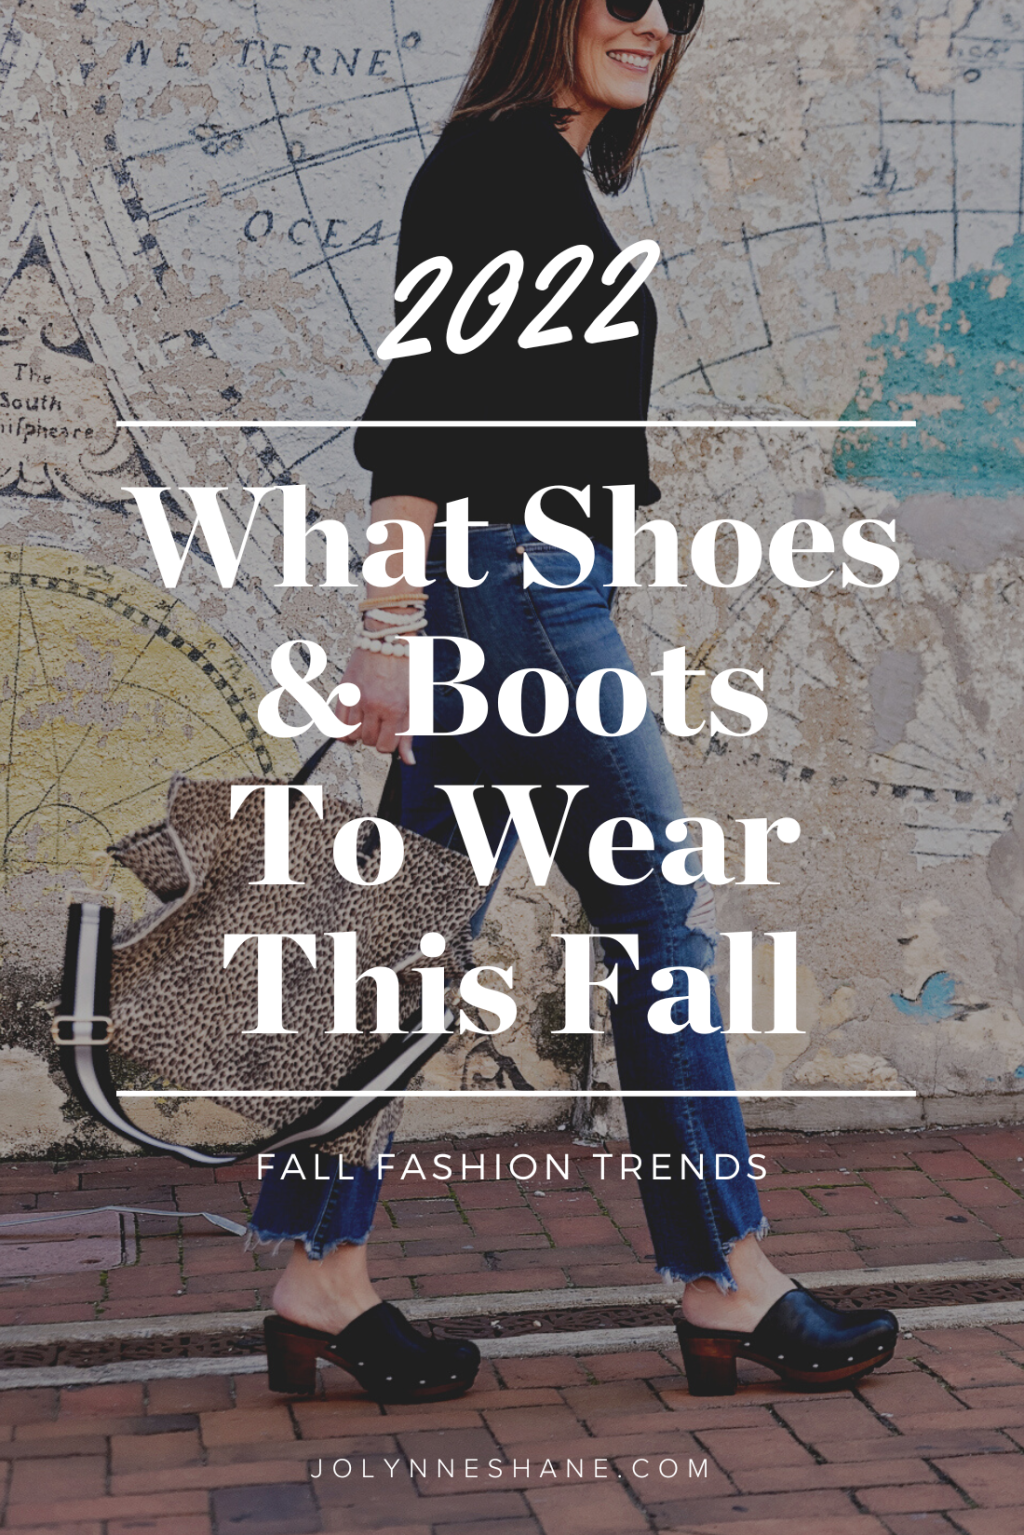 fall shoe trends to wear this season 1